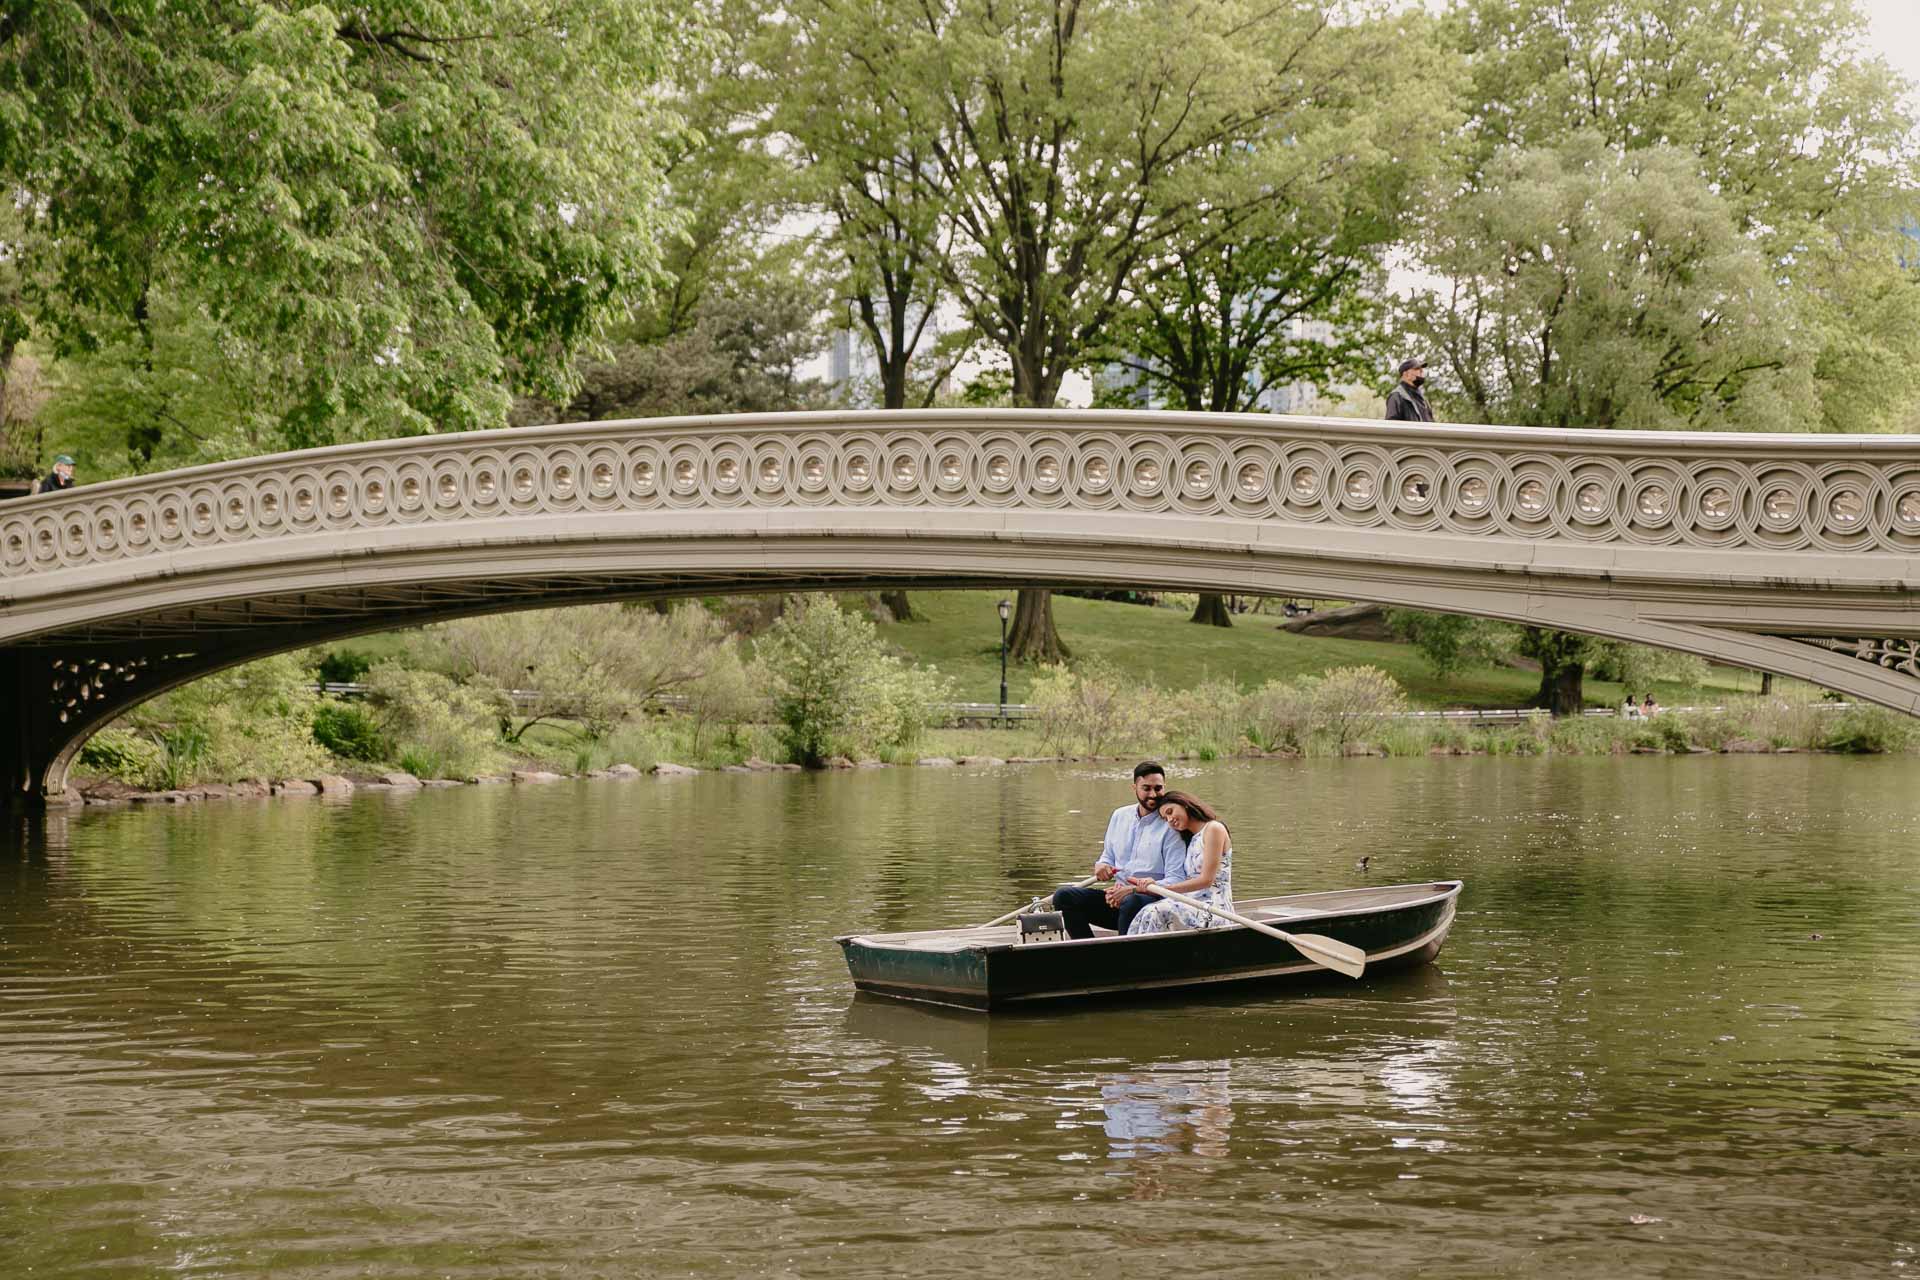 engagement photo session on a boat, central park